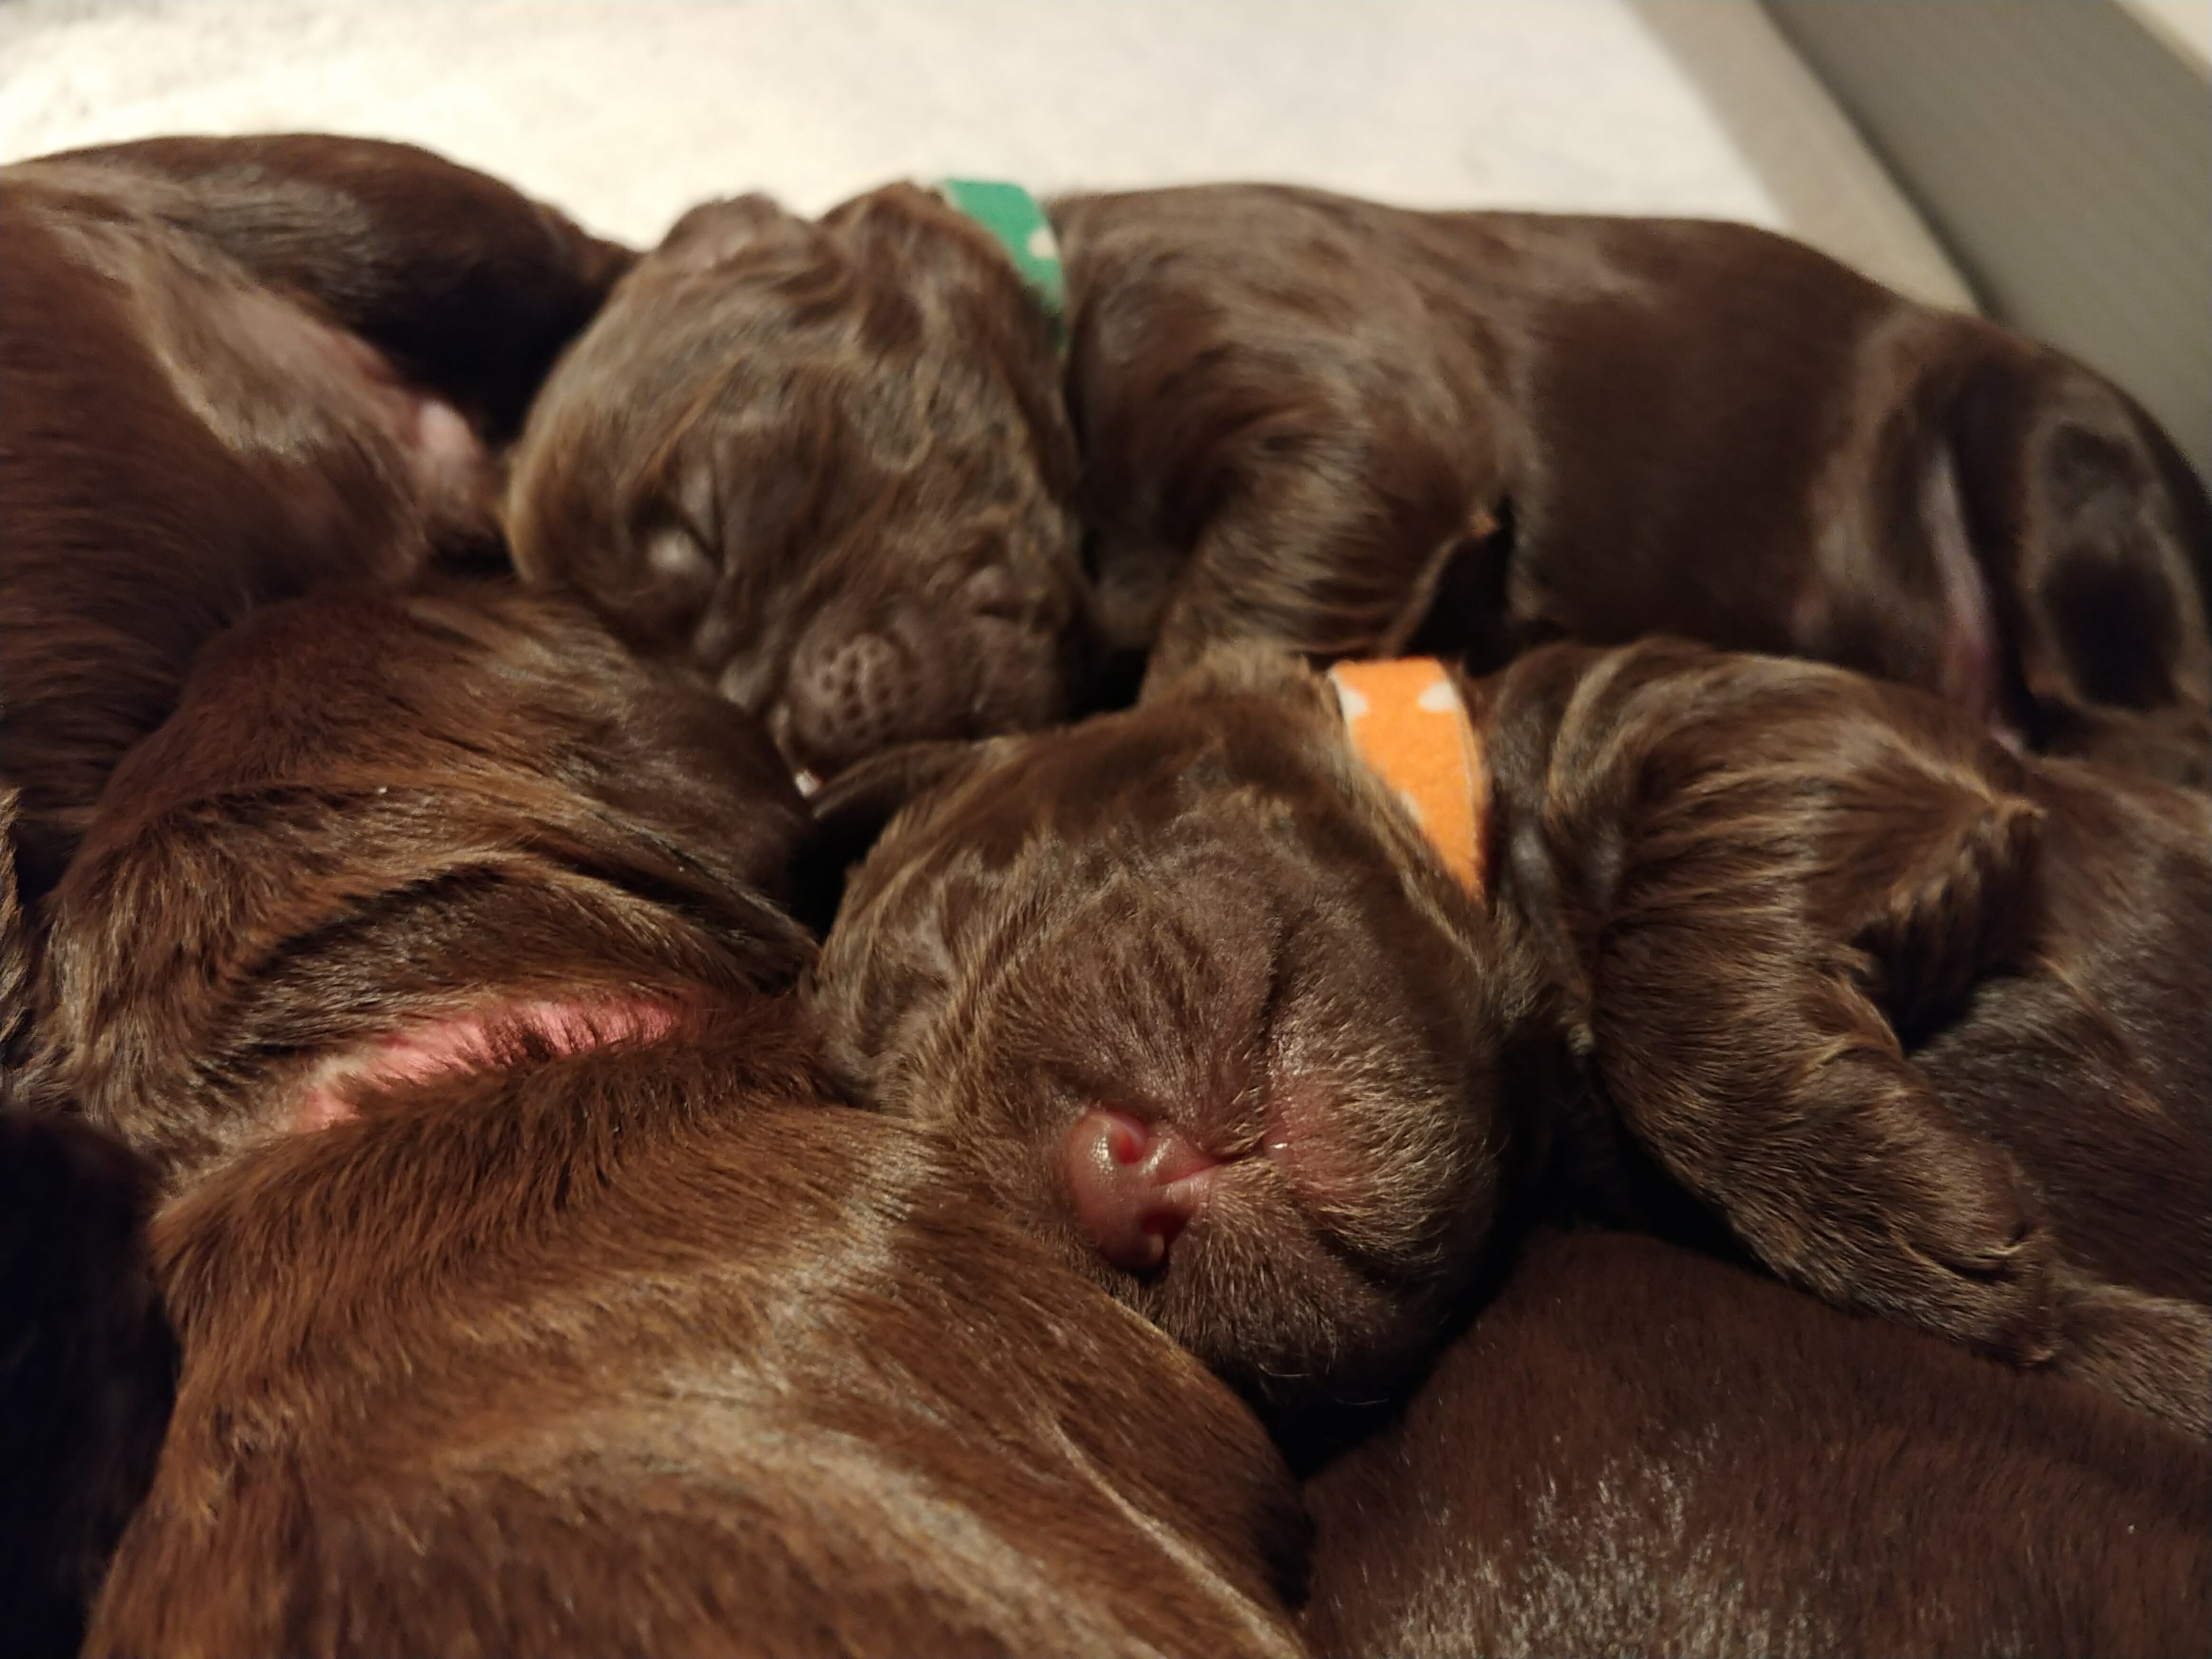 Close up of 2 one-week old chocolate colored puppies sleeping beside each other. They are on their sides both facing the camera. They are snuggled with other chocolate colored puppies.